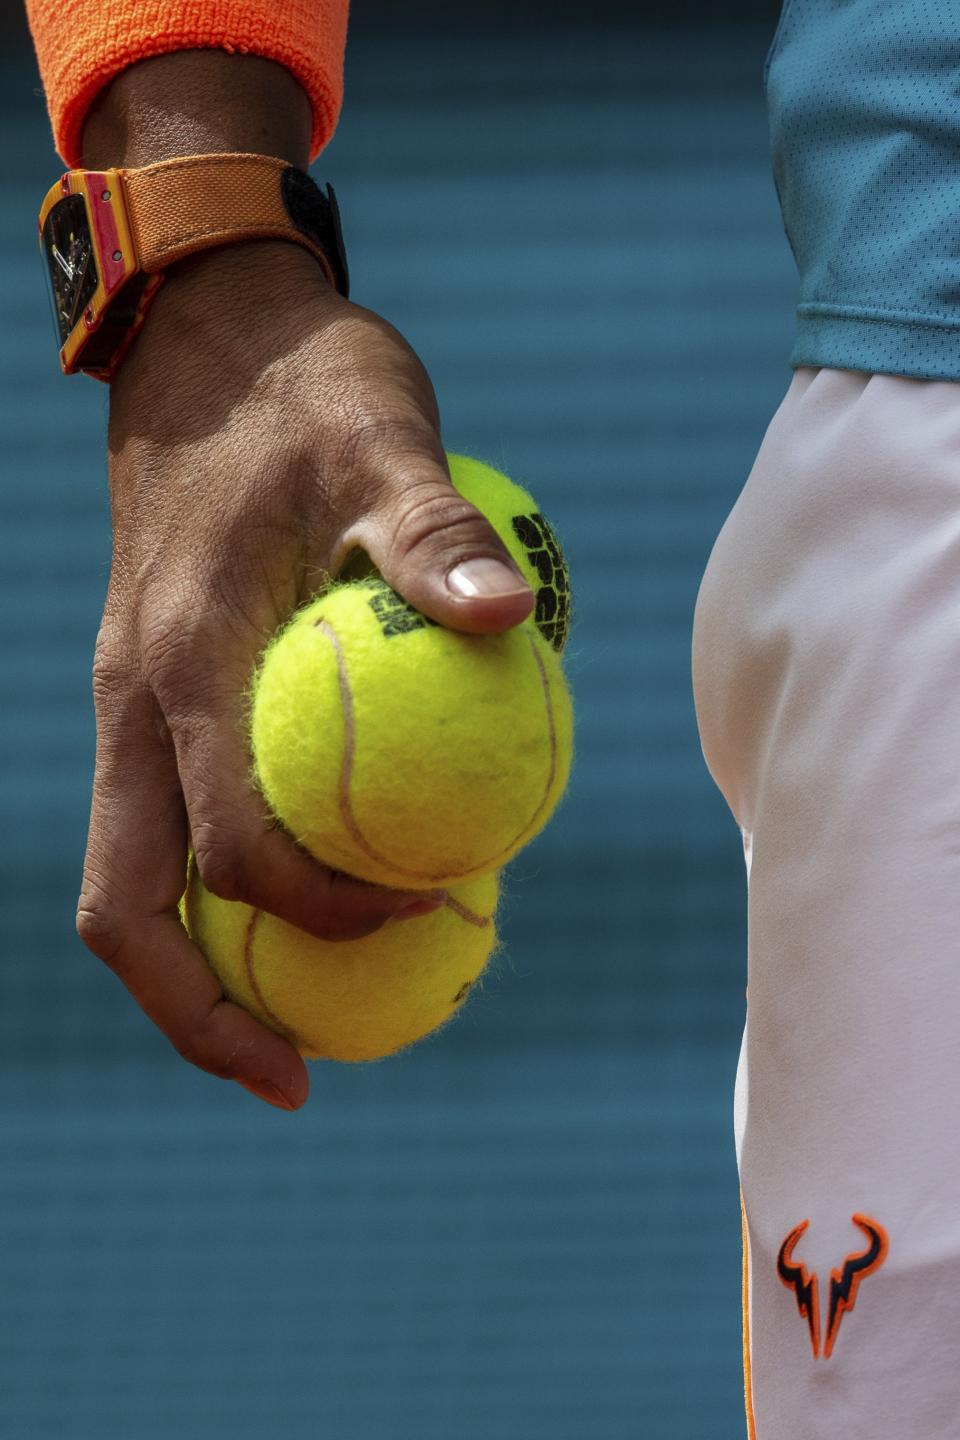 Rafael Nadal, from Spain, prepares to serve during the Madrid Open tennis match against to Felix Auger-Aliassime, from Canada, in Madrid, Wednesday, May 8, 2019. (AP Photo/Bernat Armangue)